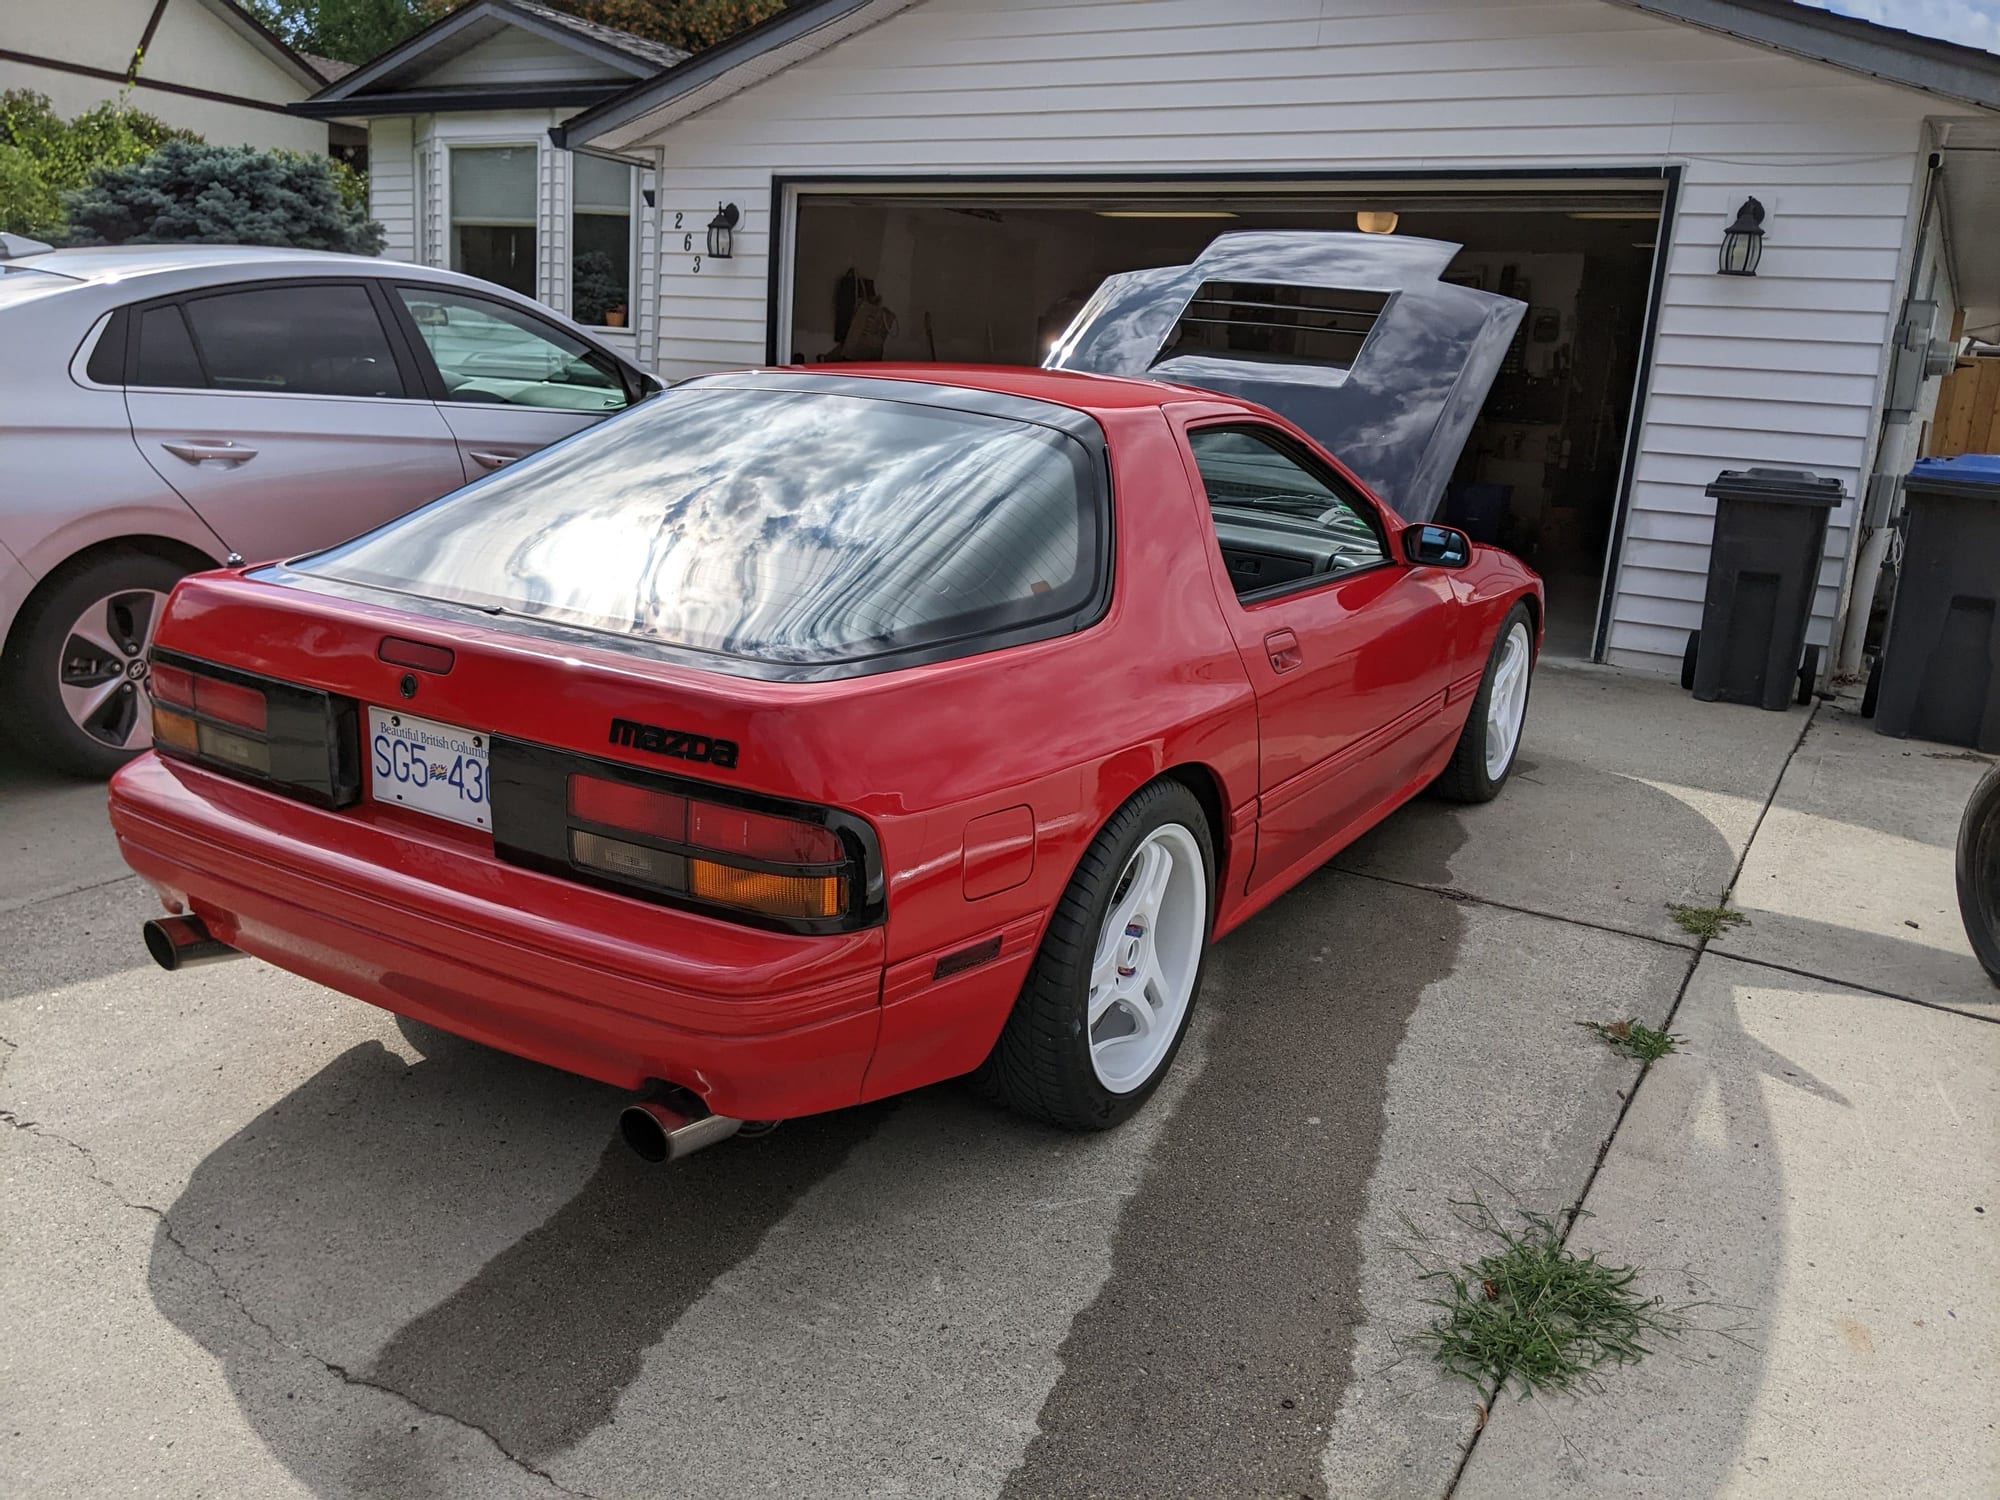 1986 Mazda RX-7 - 1986 RX-7 FC w/ GT4088 Turbo - Used - VIN JM1FC3319G0147290 - 1,302 Miles - Other - 2WD - Manual - Coupe - Red - Kelowna, BC V1X7A5, Canada